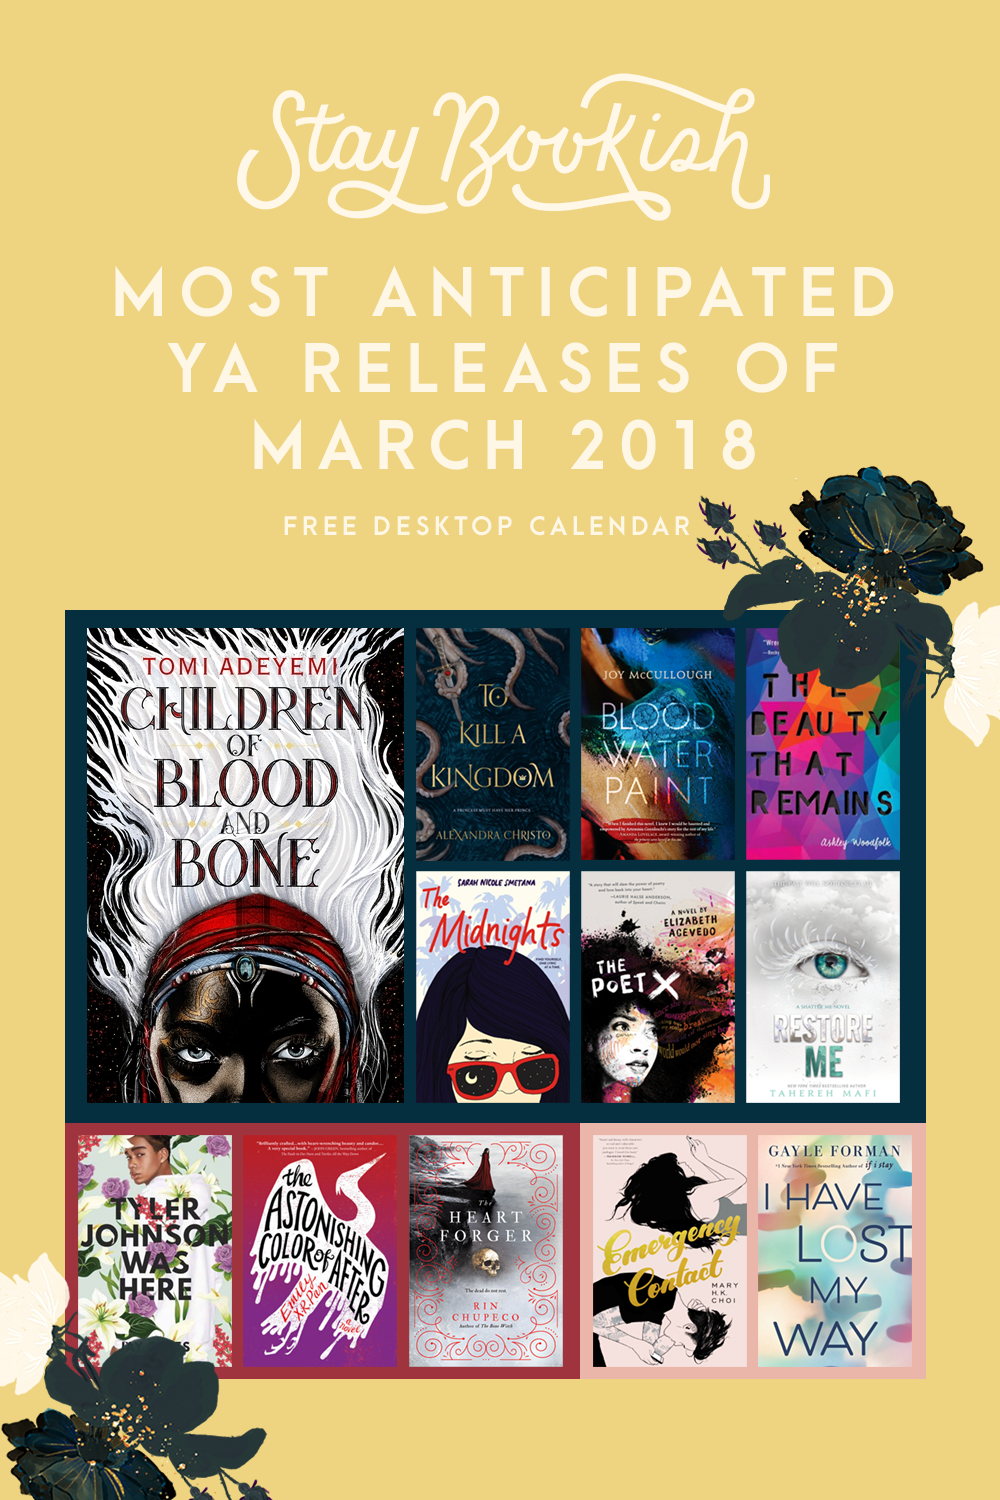 Our Most Anticipated YA Releases || March 2018